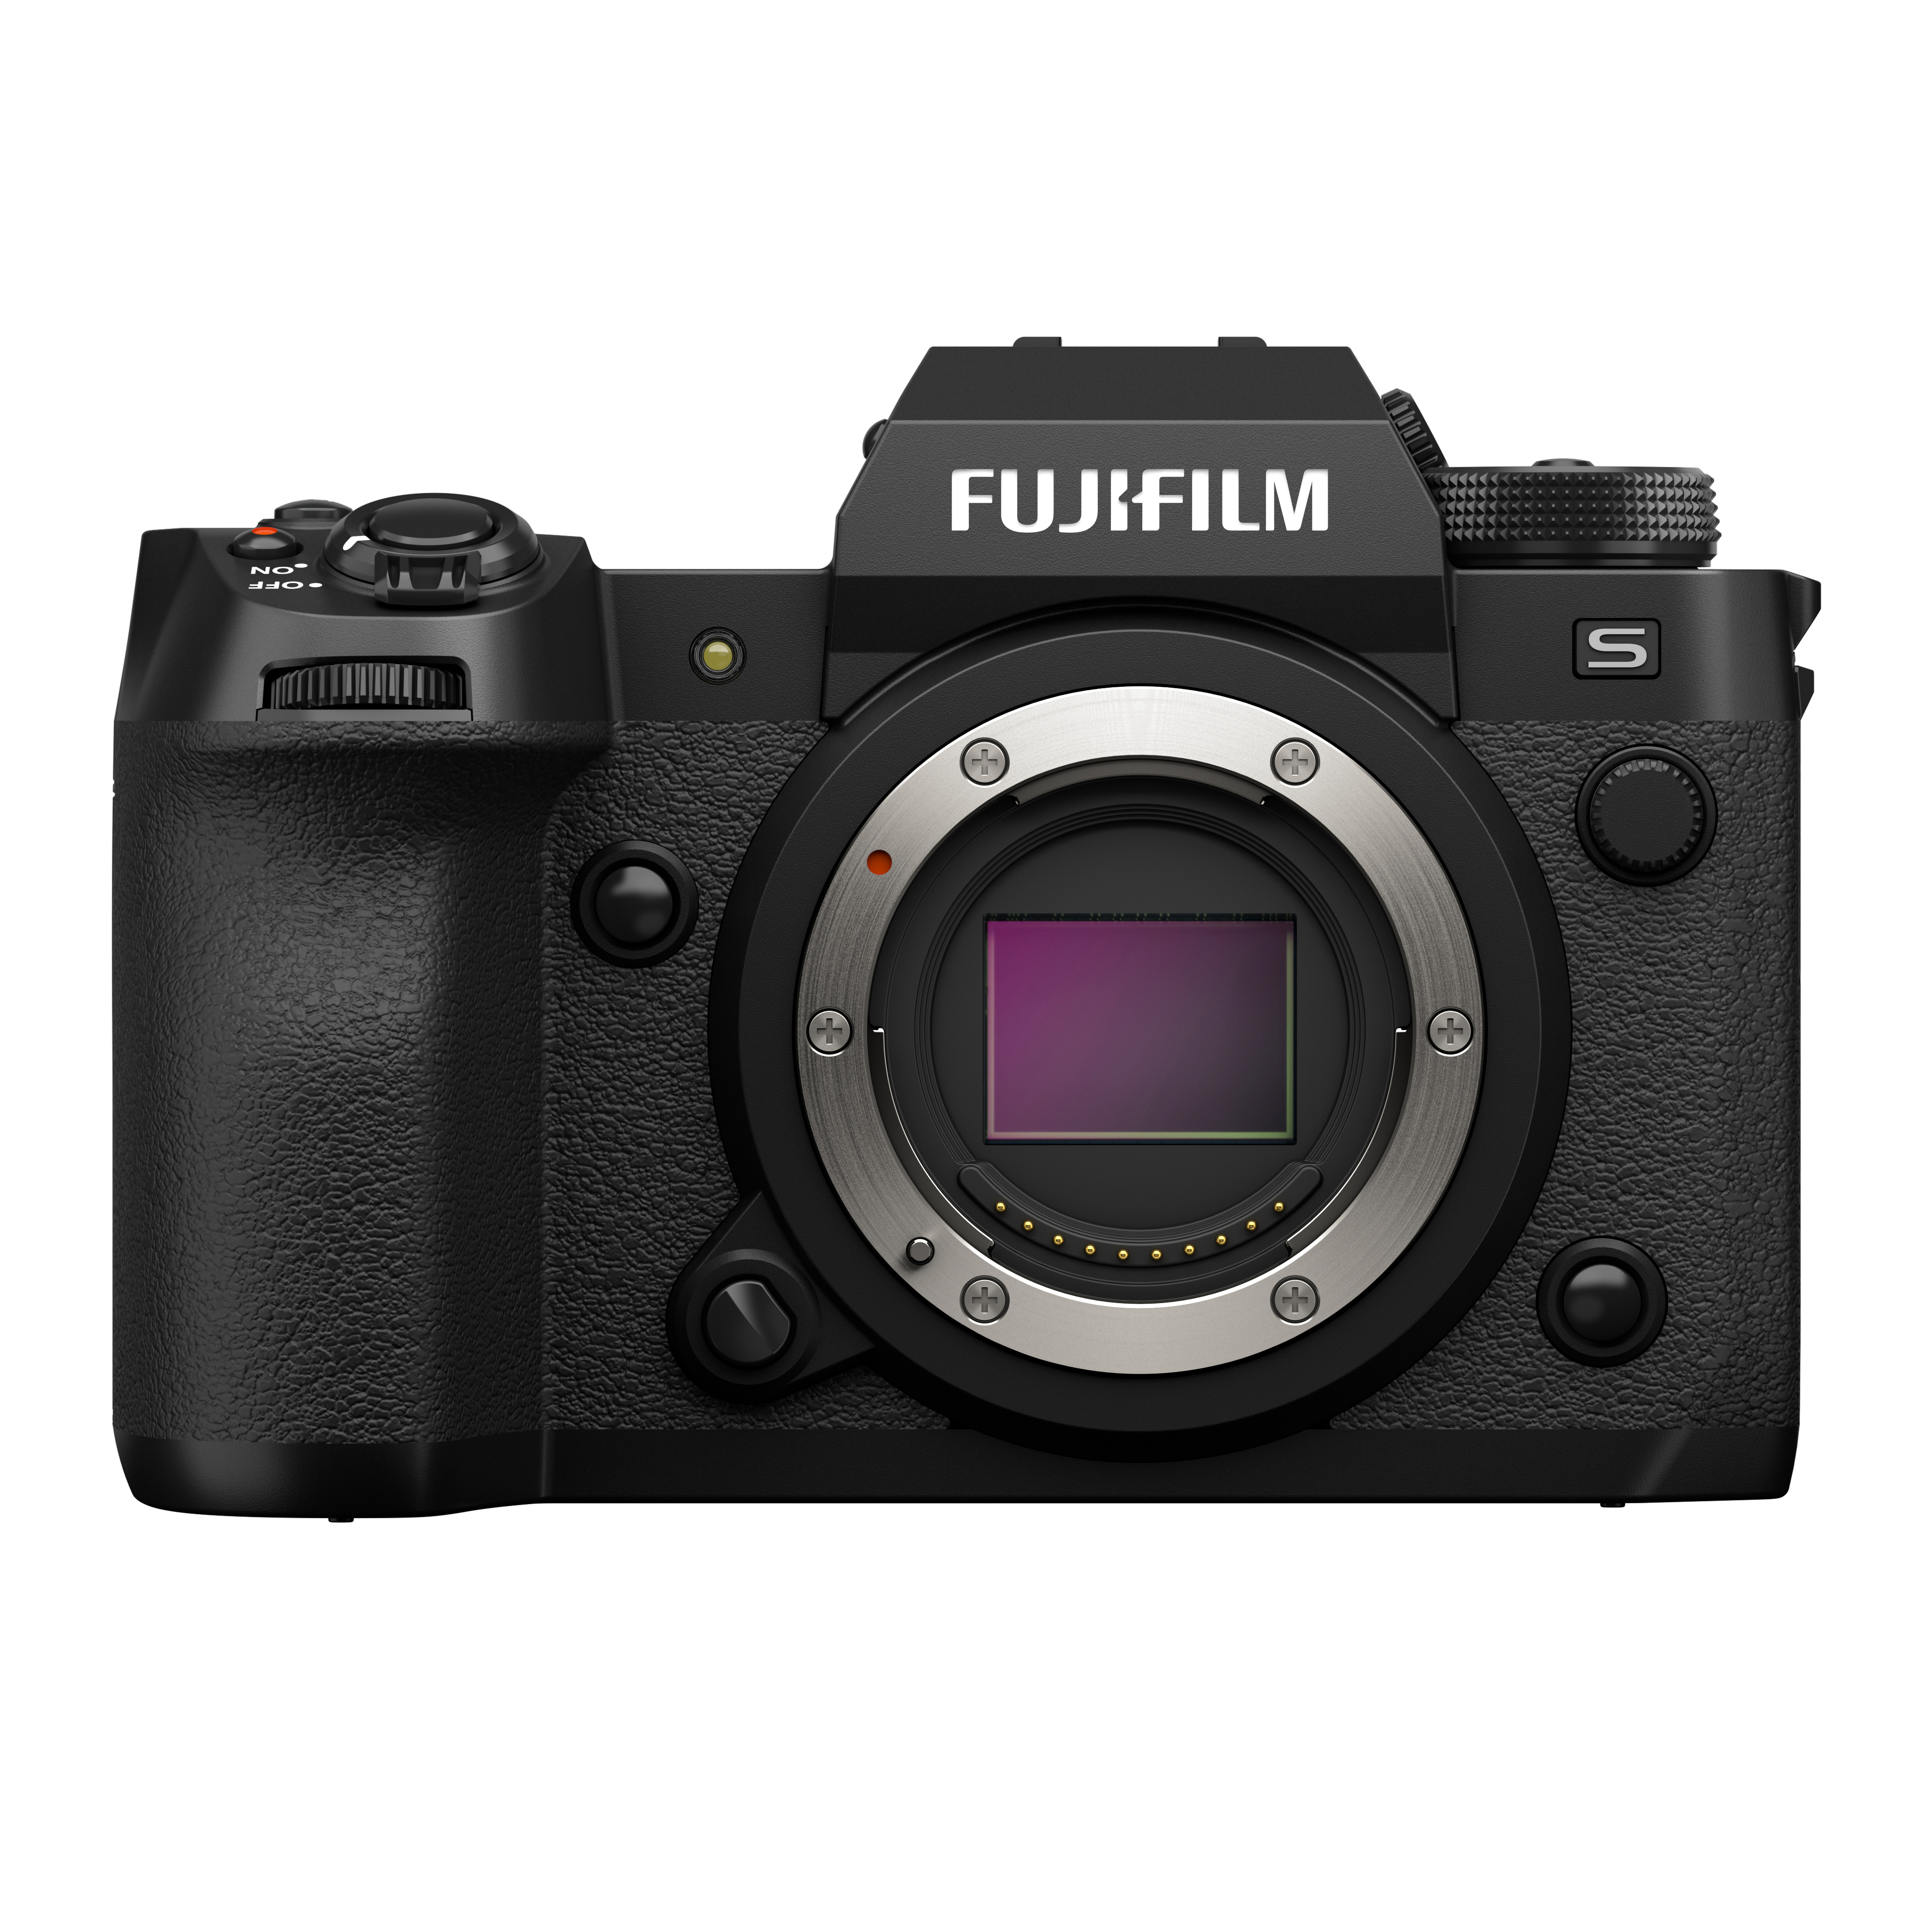 Is the Fujifilm XH2s Too Little Too Late?